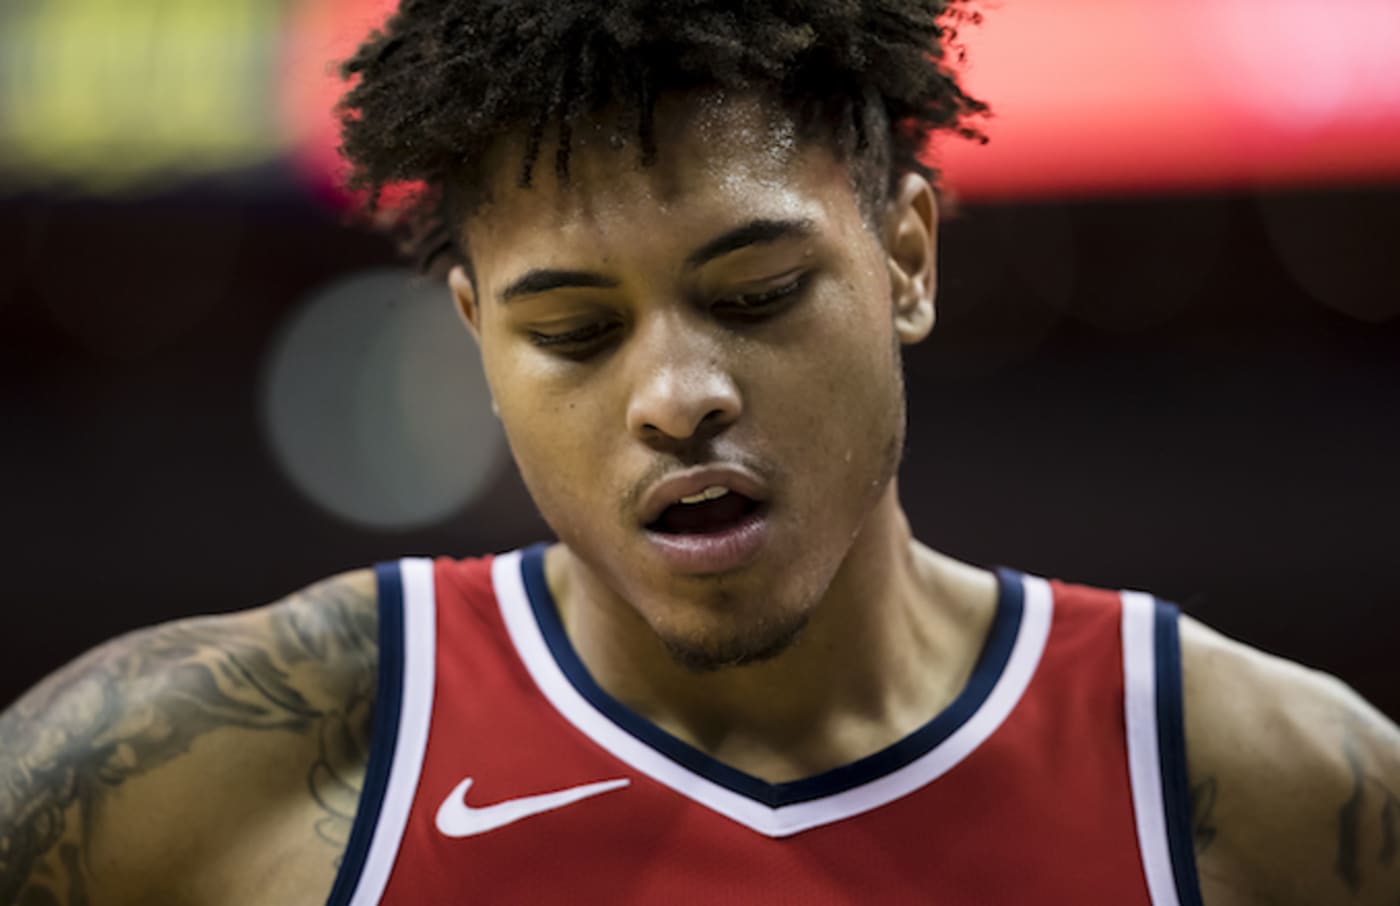 Kelly Oubre Jr. #12 of the Washington Wizards.